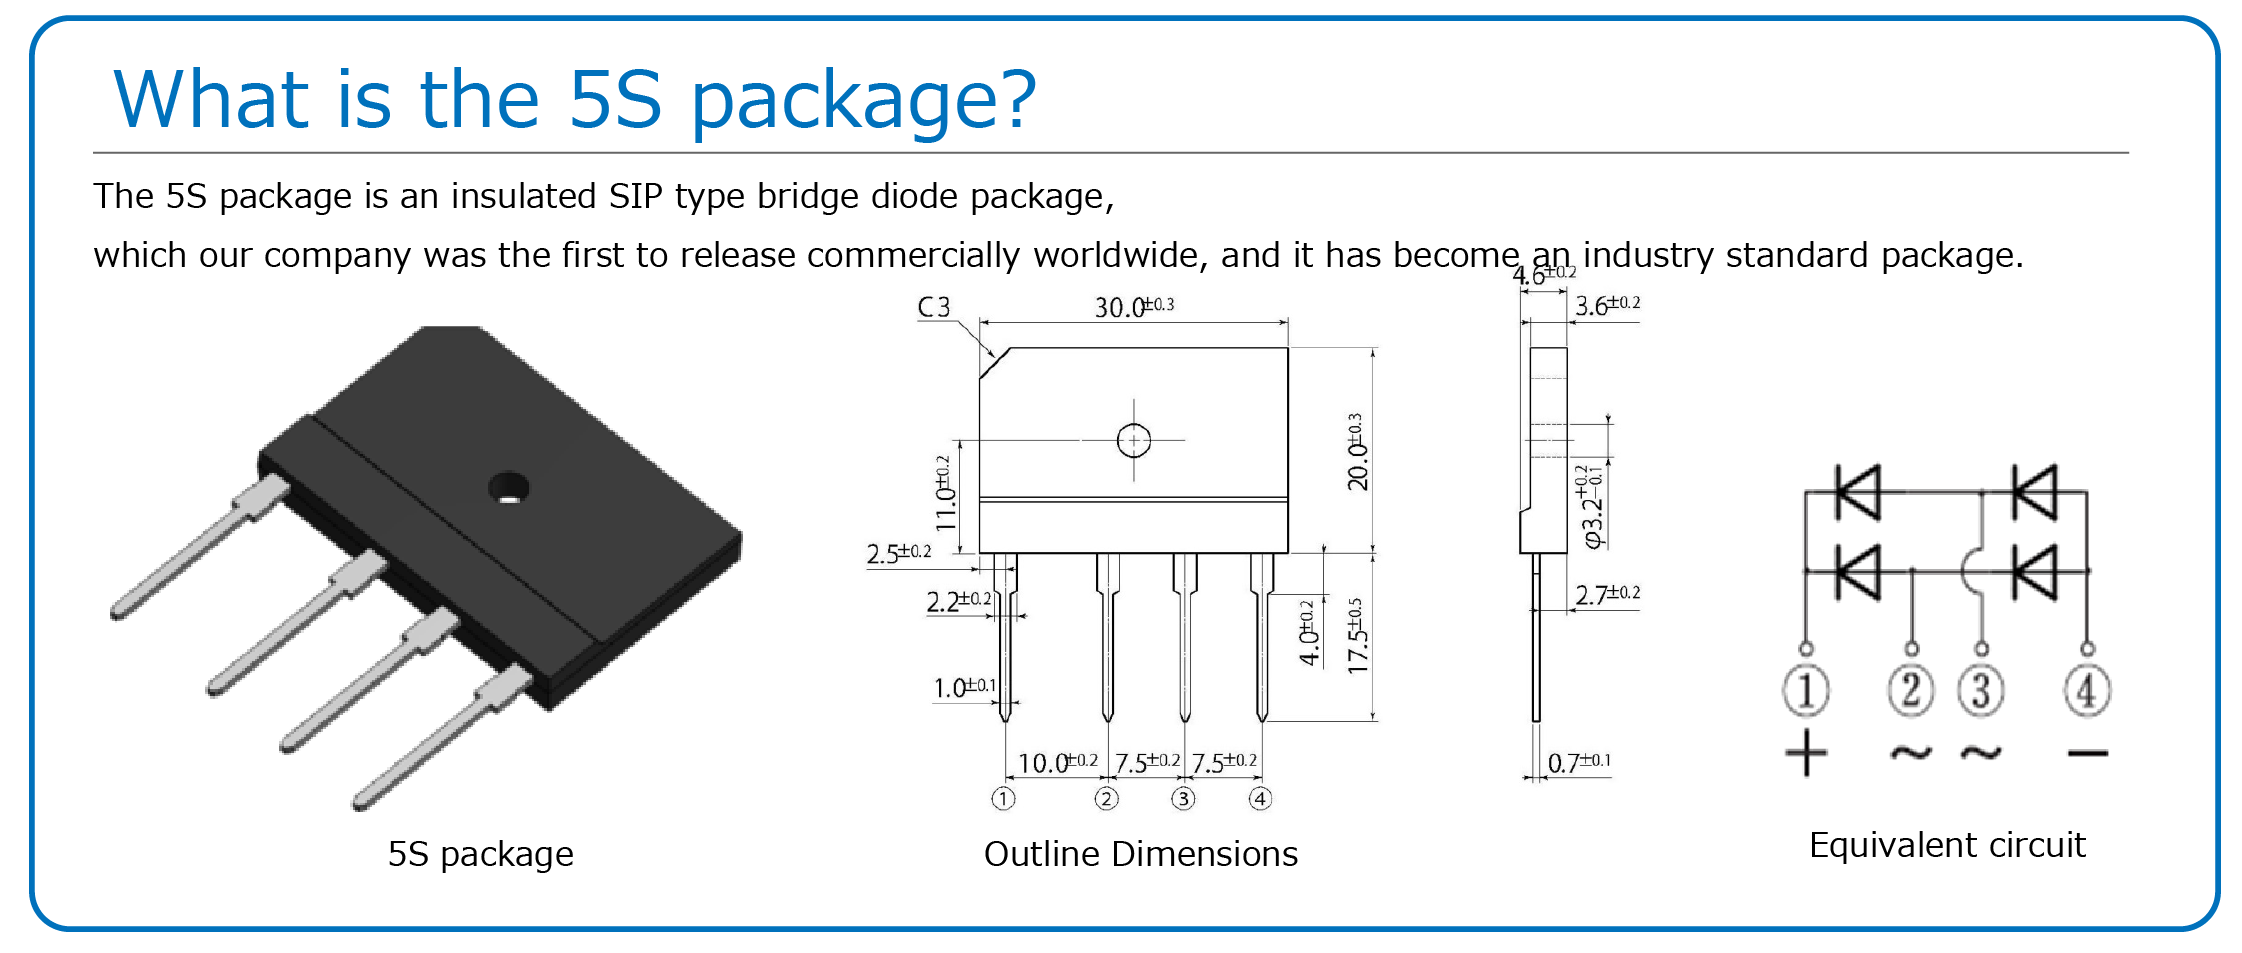 What is the 5S package?